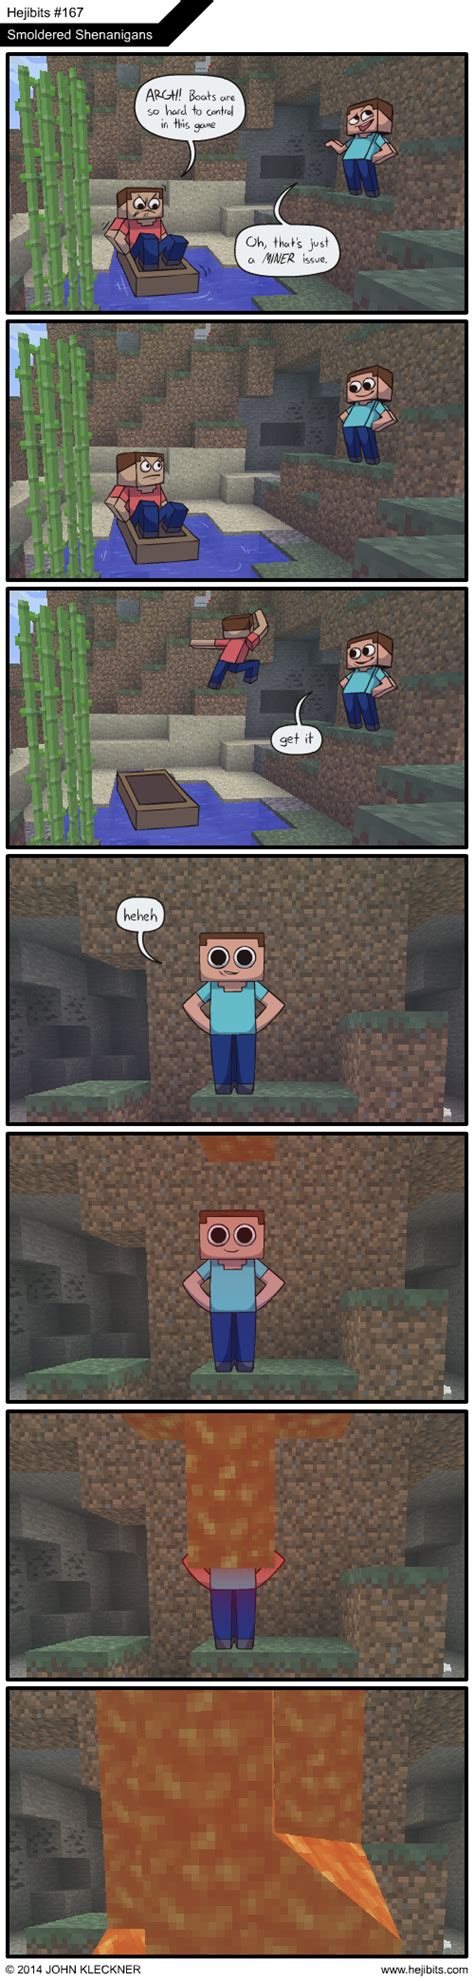 he should have mined his own business minecraft funny minecraft minecraft jokes